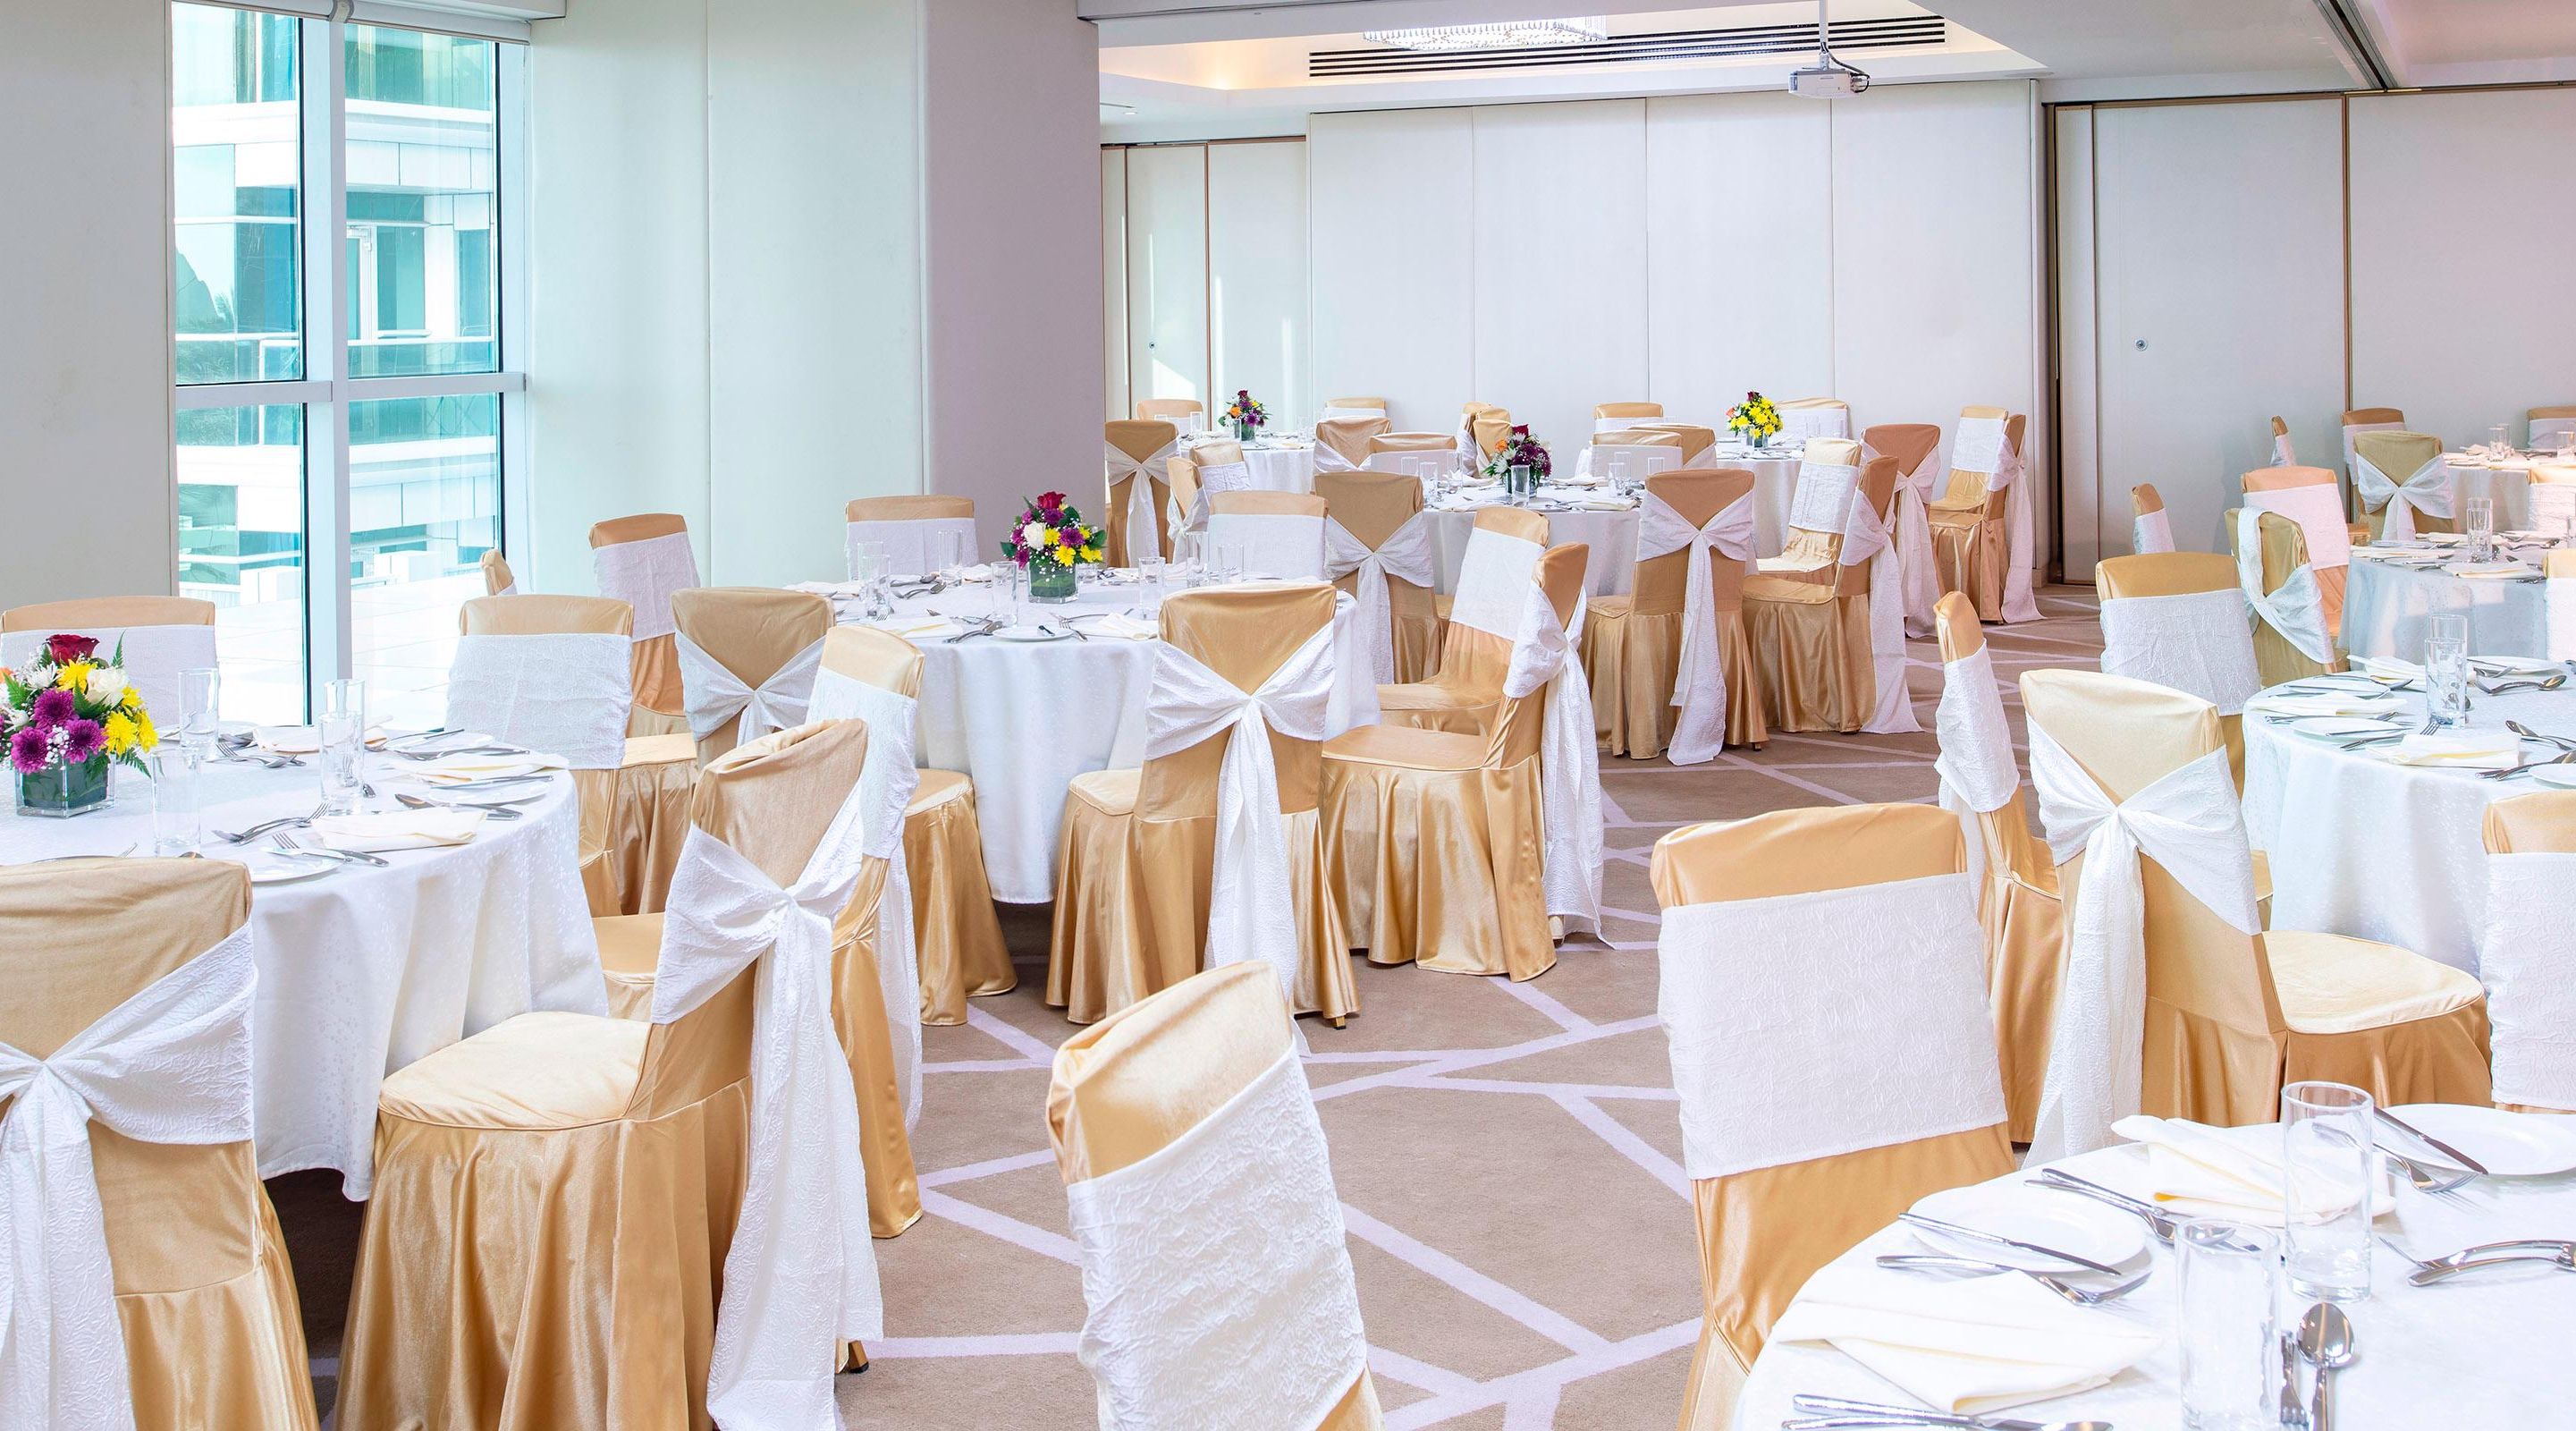 Covid-19 guidelines updated for weddings, social events in Sharjah